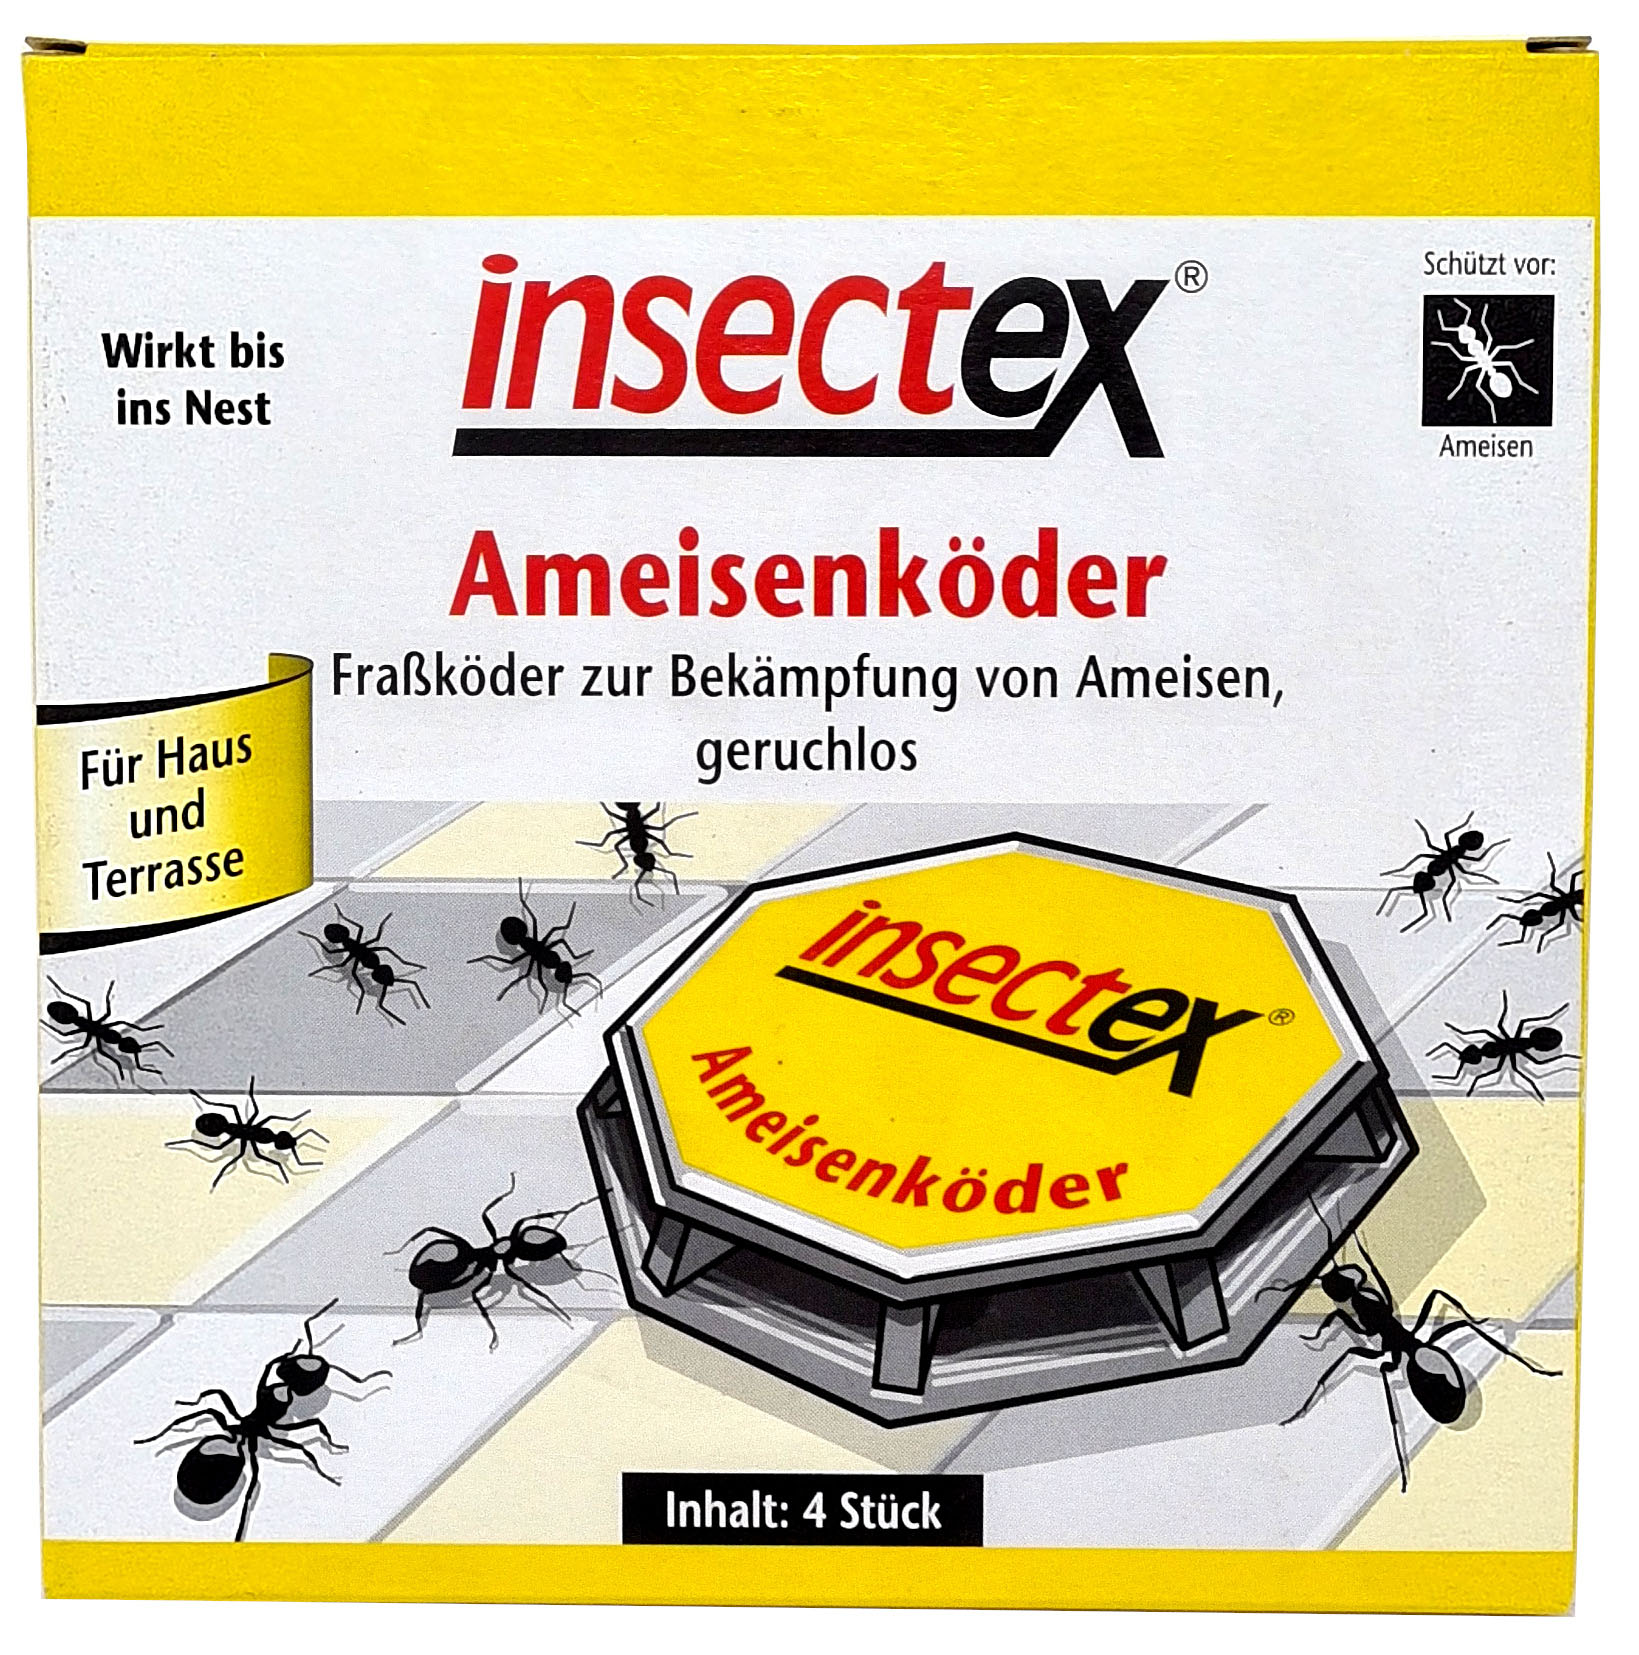 02180 - Insectex Ameisenköder 4er Pack BIOZID